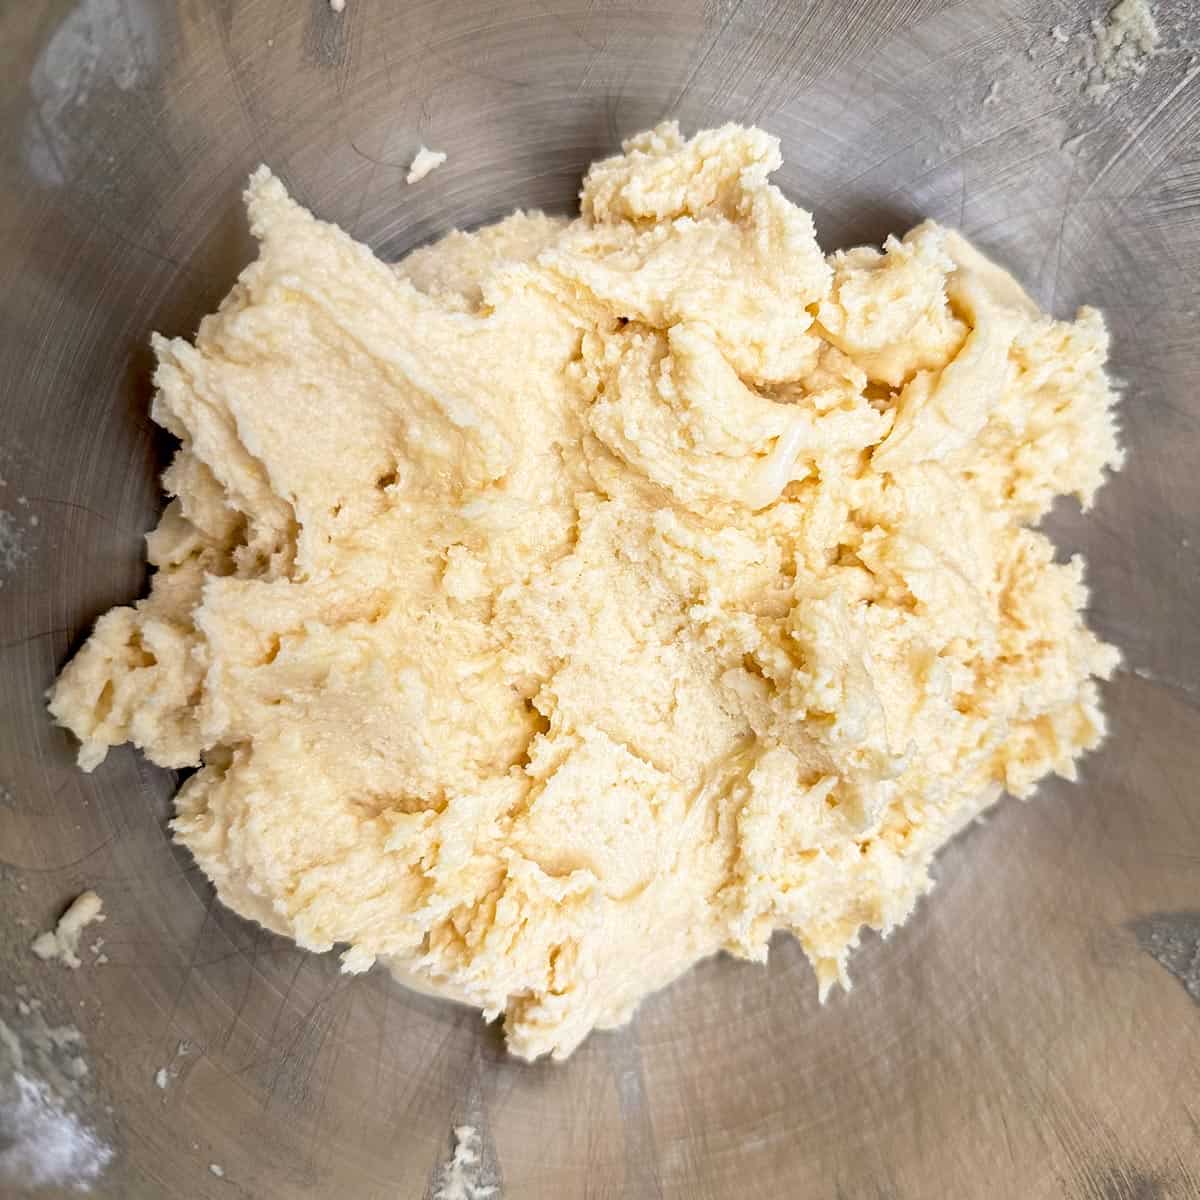 All ingredients have been add to a mixer bowl for making Amish sugar cookies.